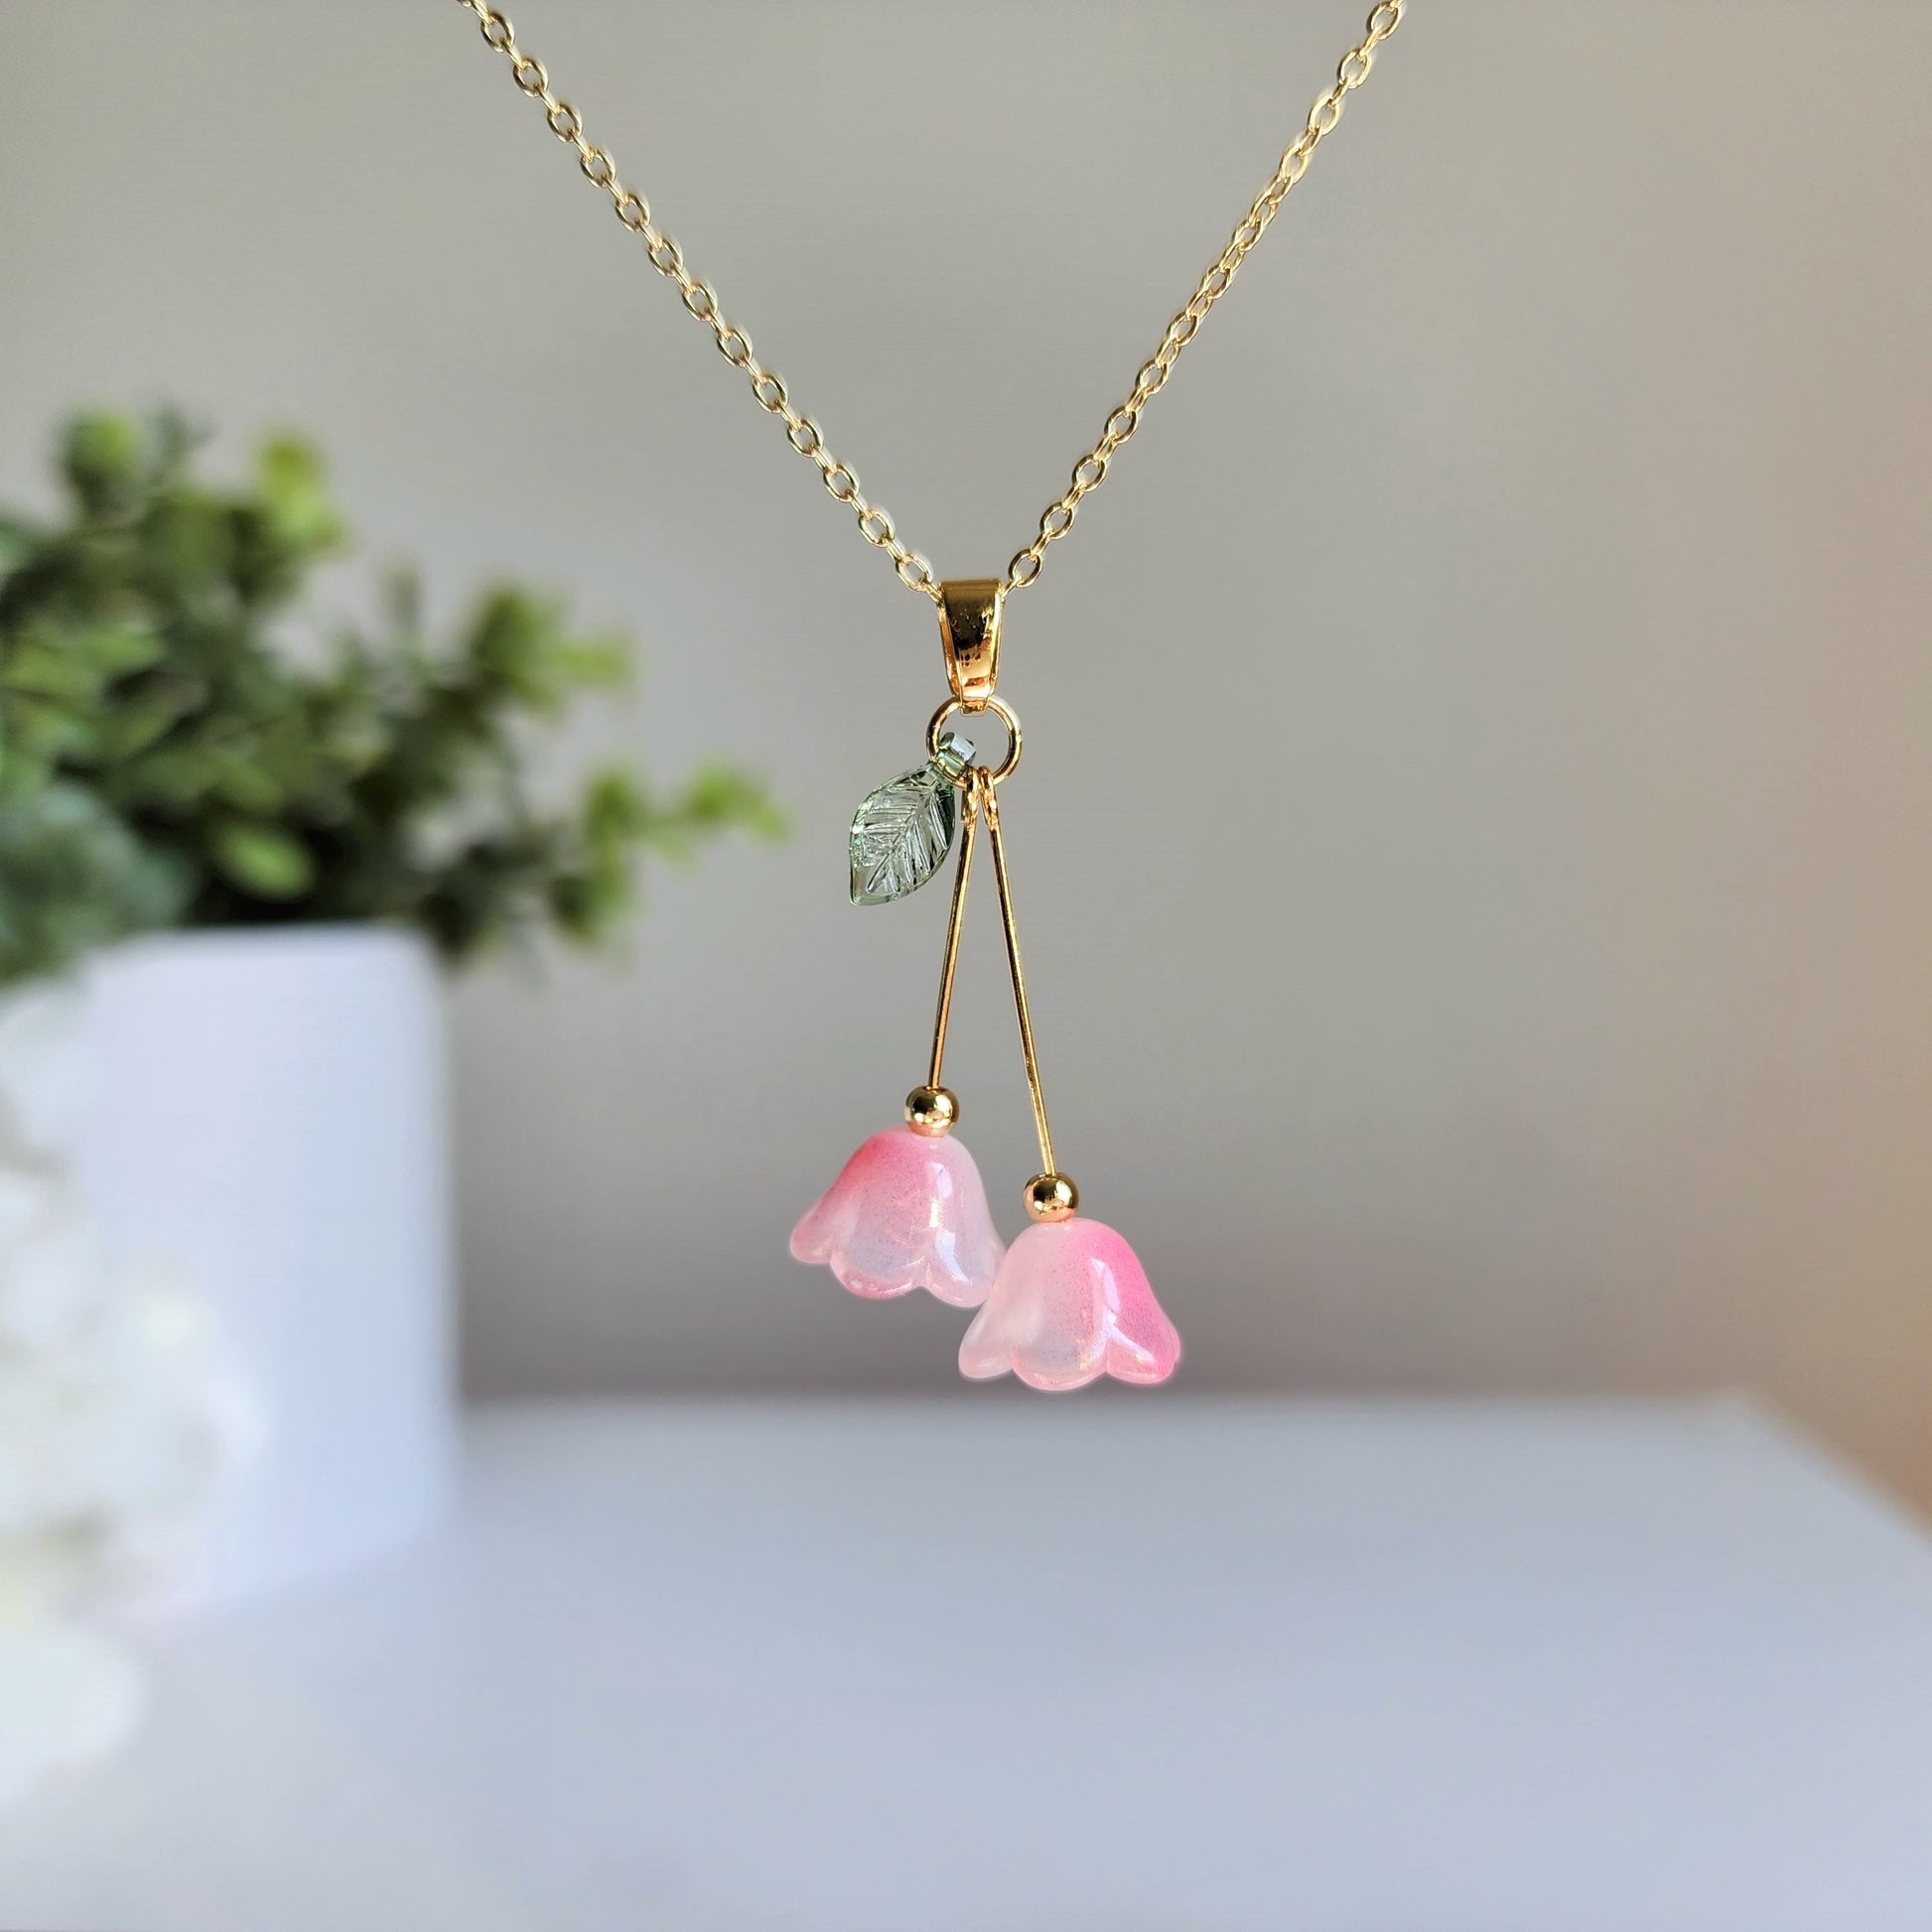 Lily of the valley necklace, Lily flower necklace, Gift for her